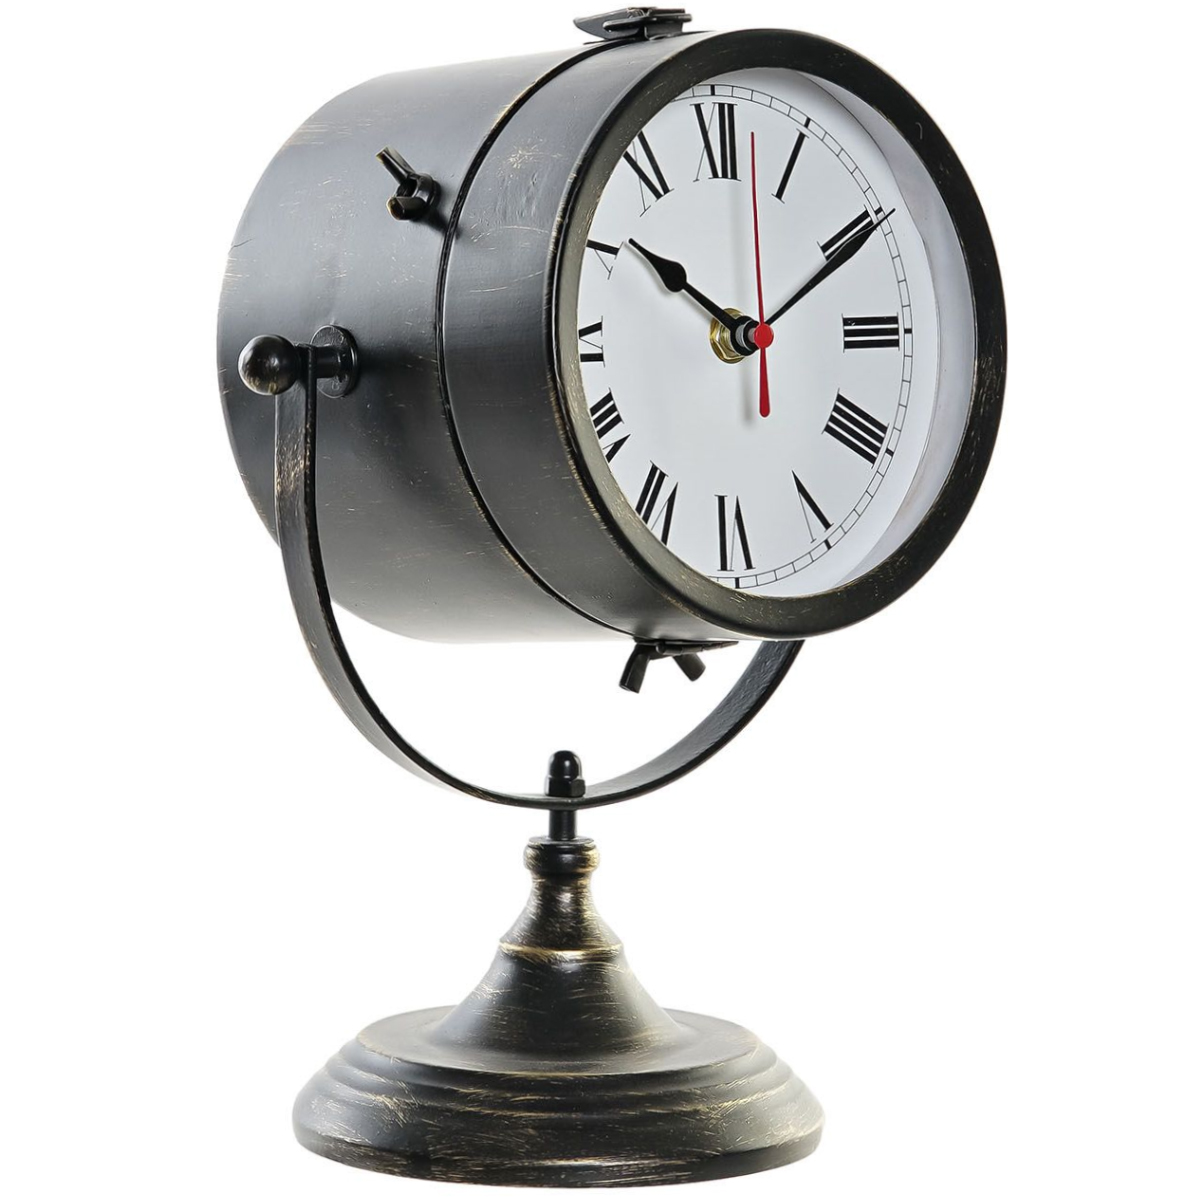 Retro standing clock in black metal with gold patina